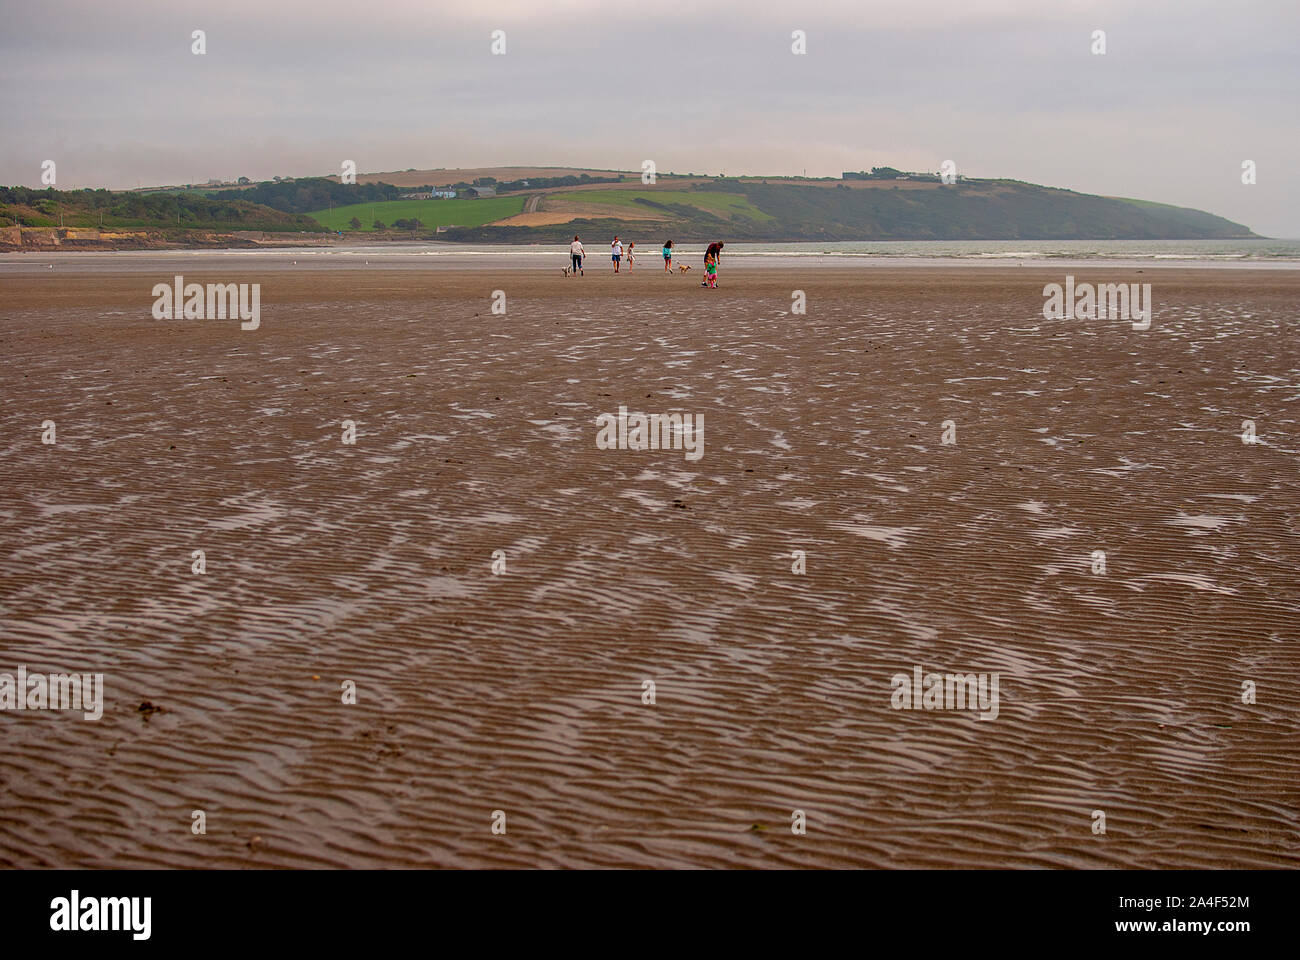 People walking on sandy beach leaving footprints in the sand. Family with children and a dog playing on Killbrittain beach, Ireland. Cloudy day. Stock Photo